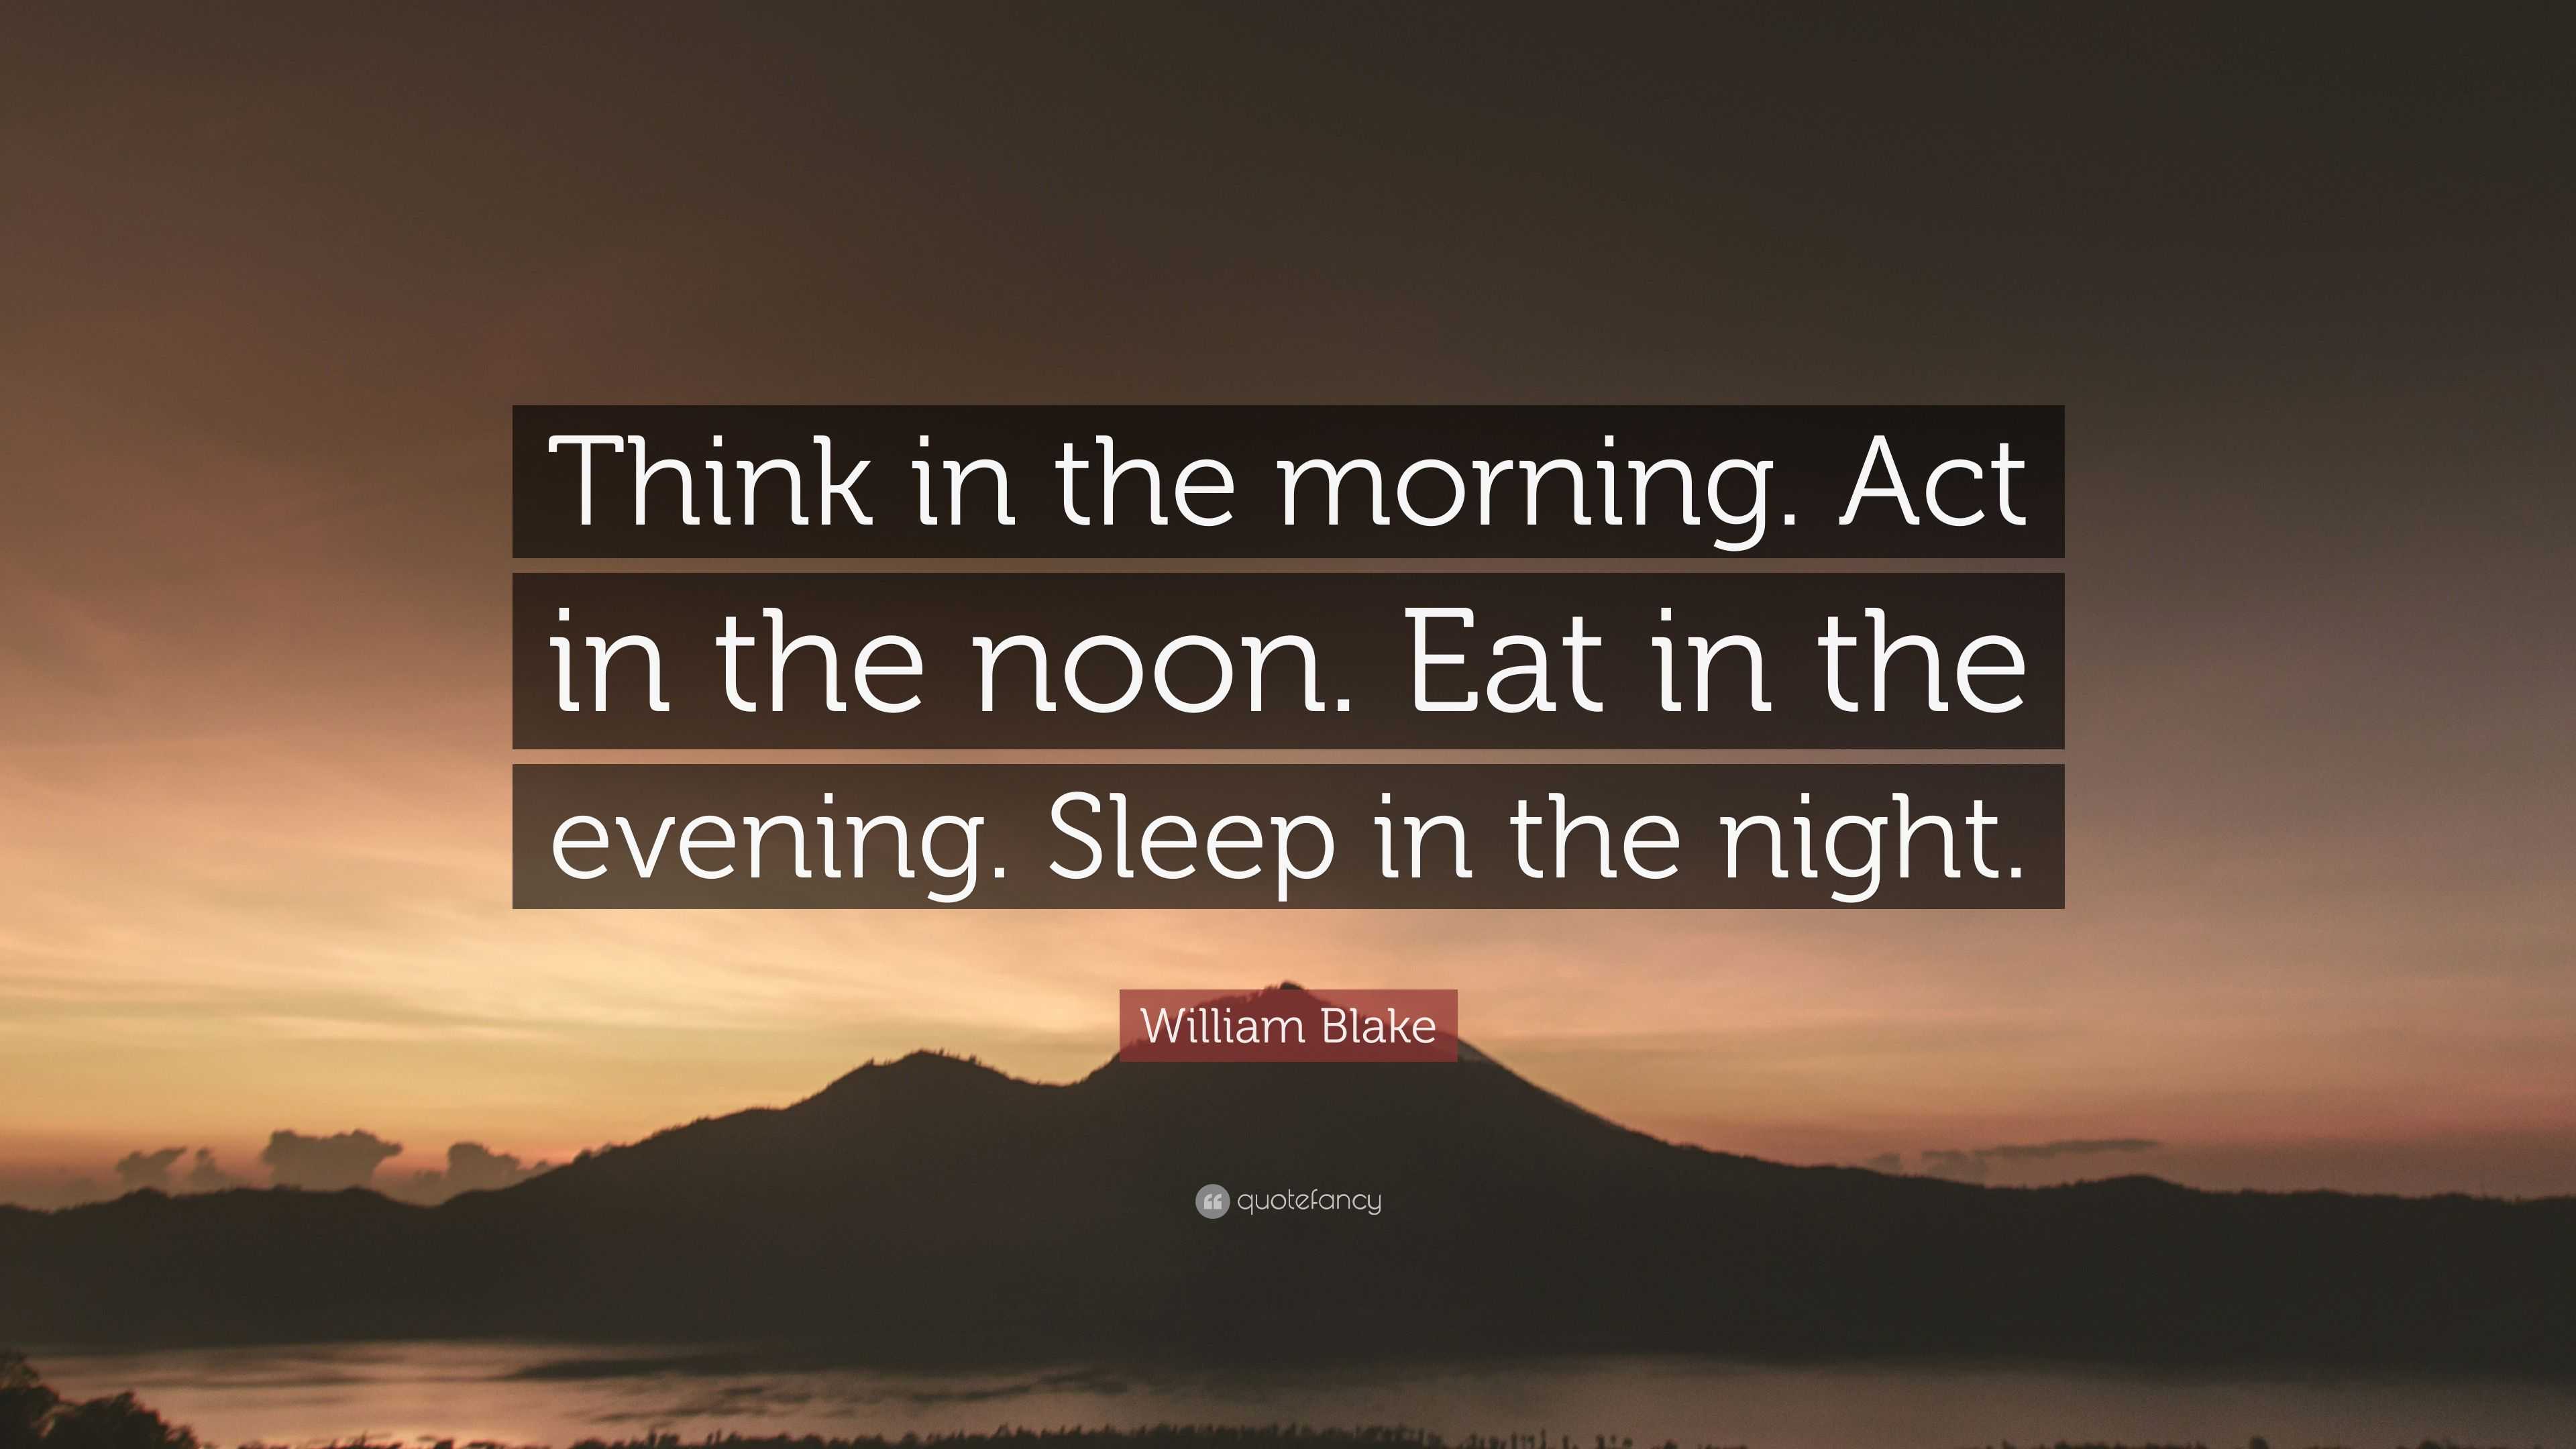 William Blake Quote: “Think in the morning. Act in the noon. Eat in the ...